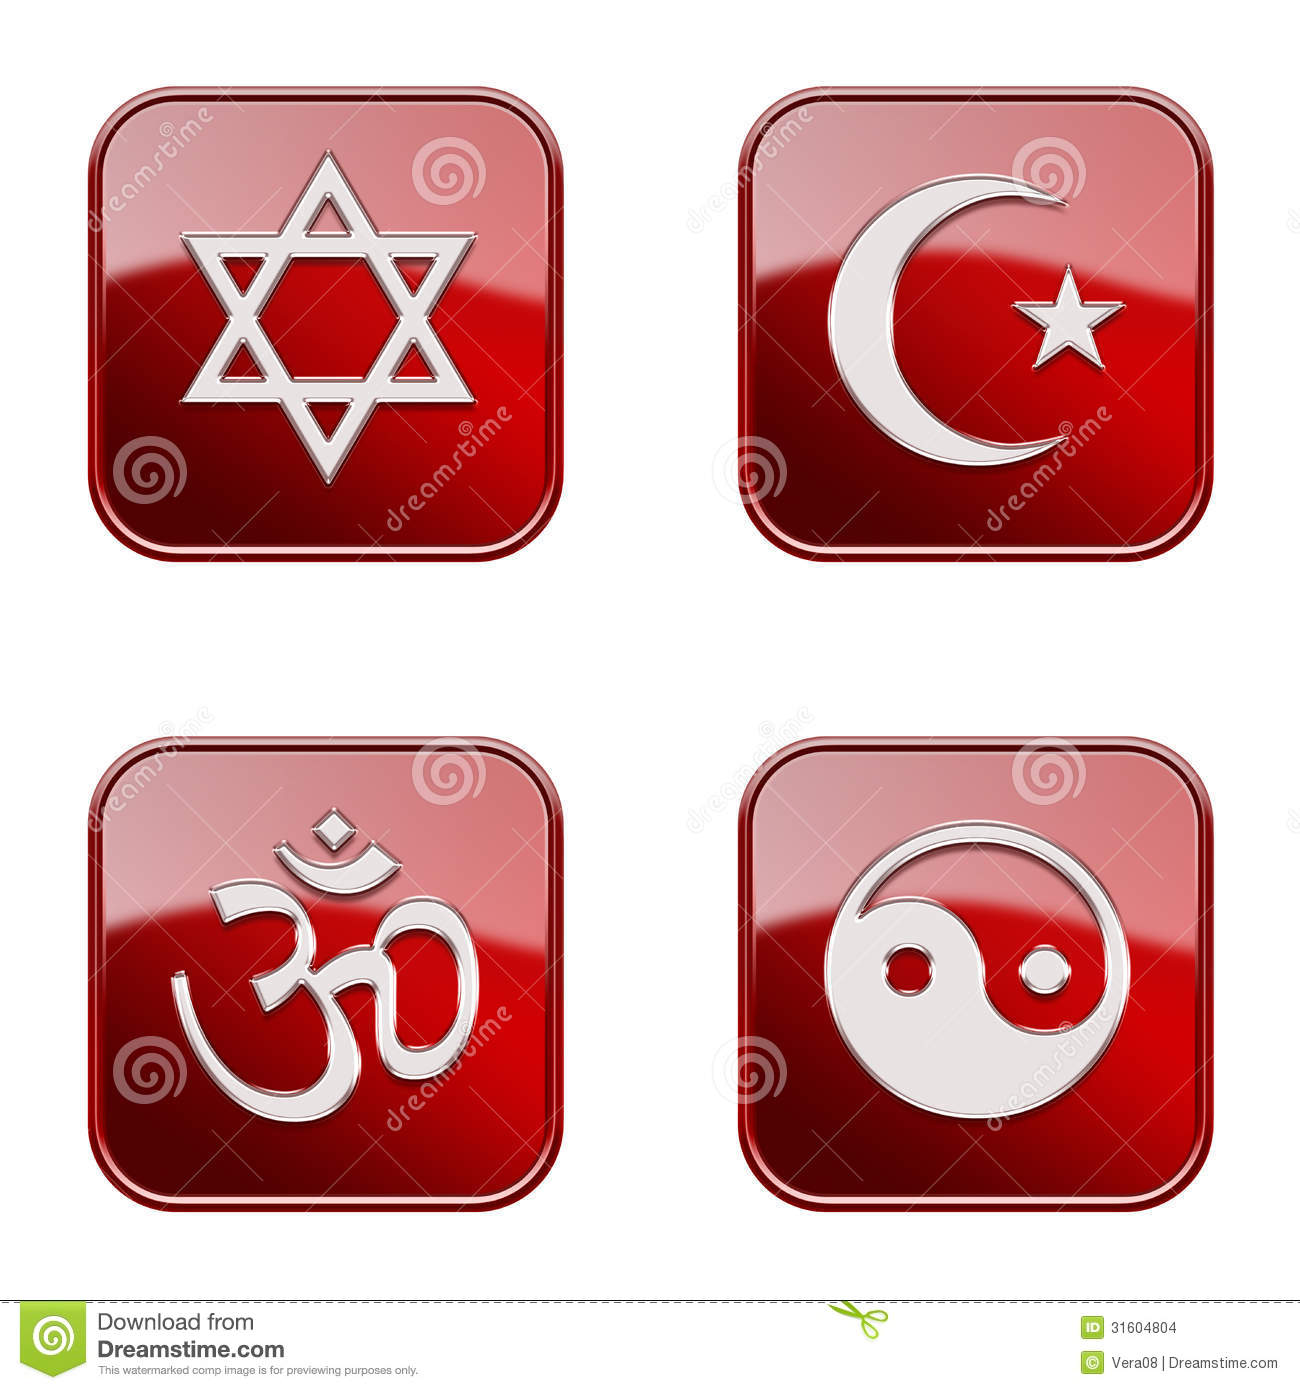 Red and White Om Symbol